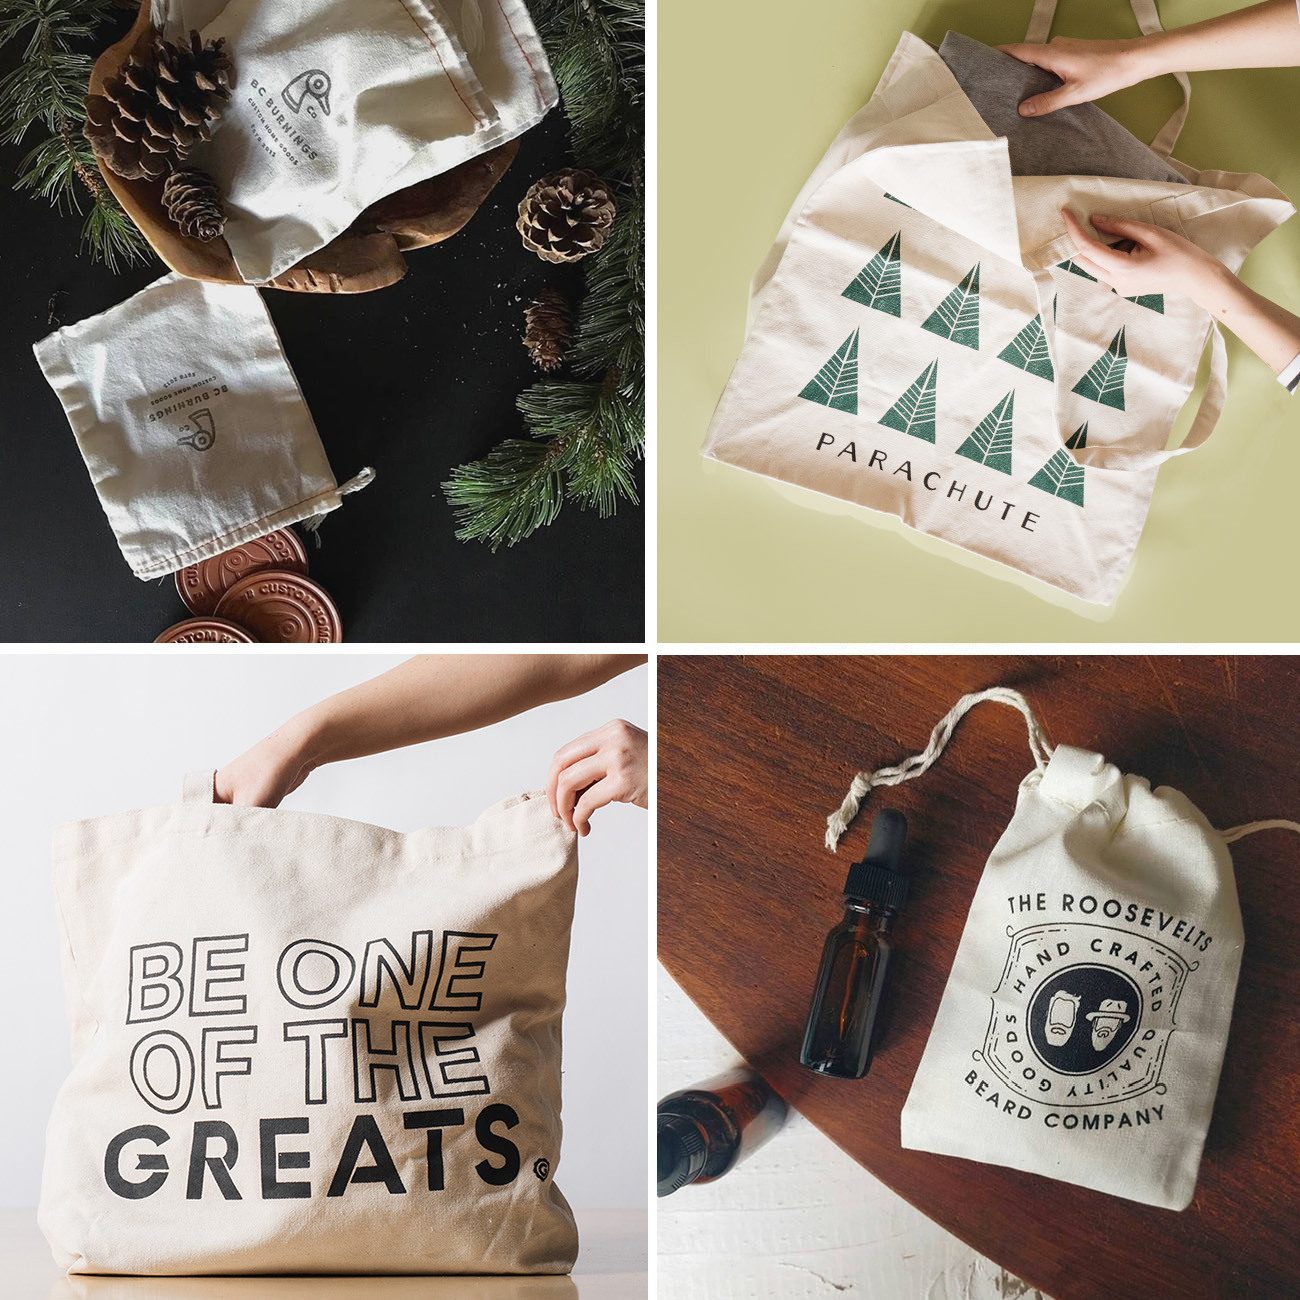 Photos via: Tubby Todd, BC Burnings, Lumi 90 Ideas to Spruce Up Your Holiday Packaging Design